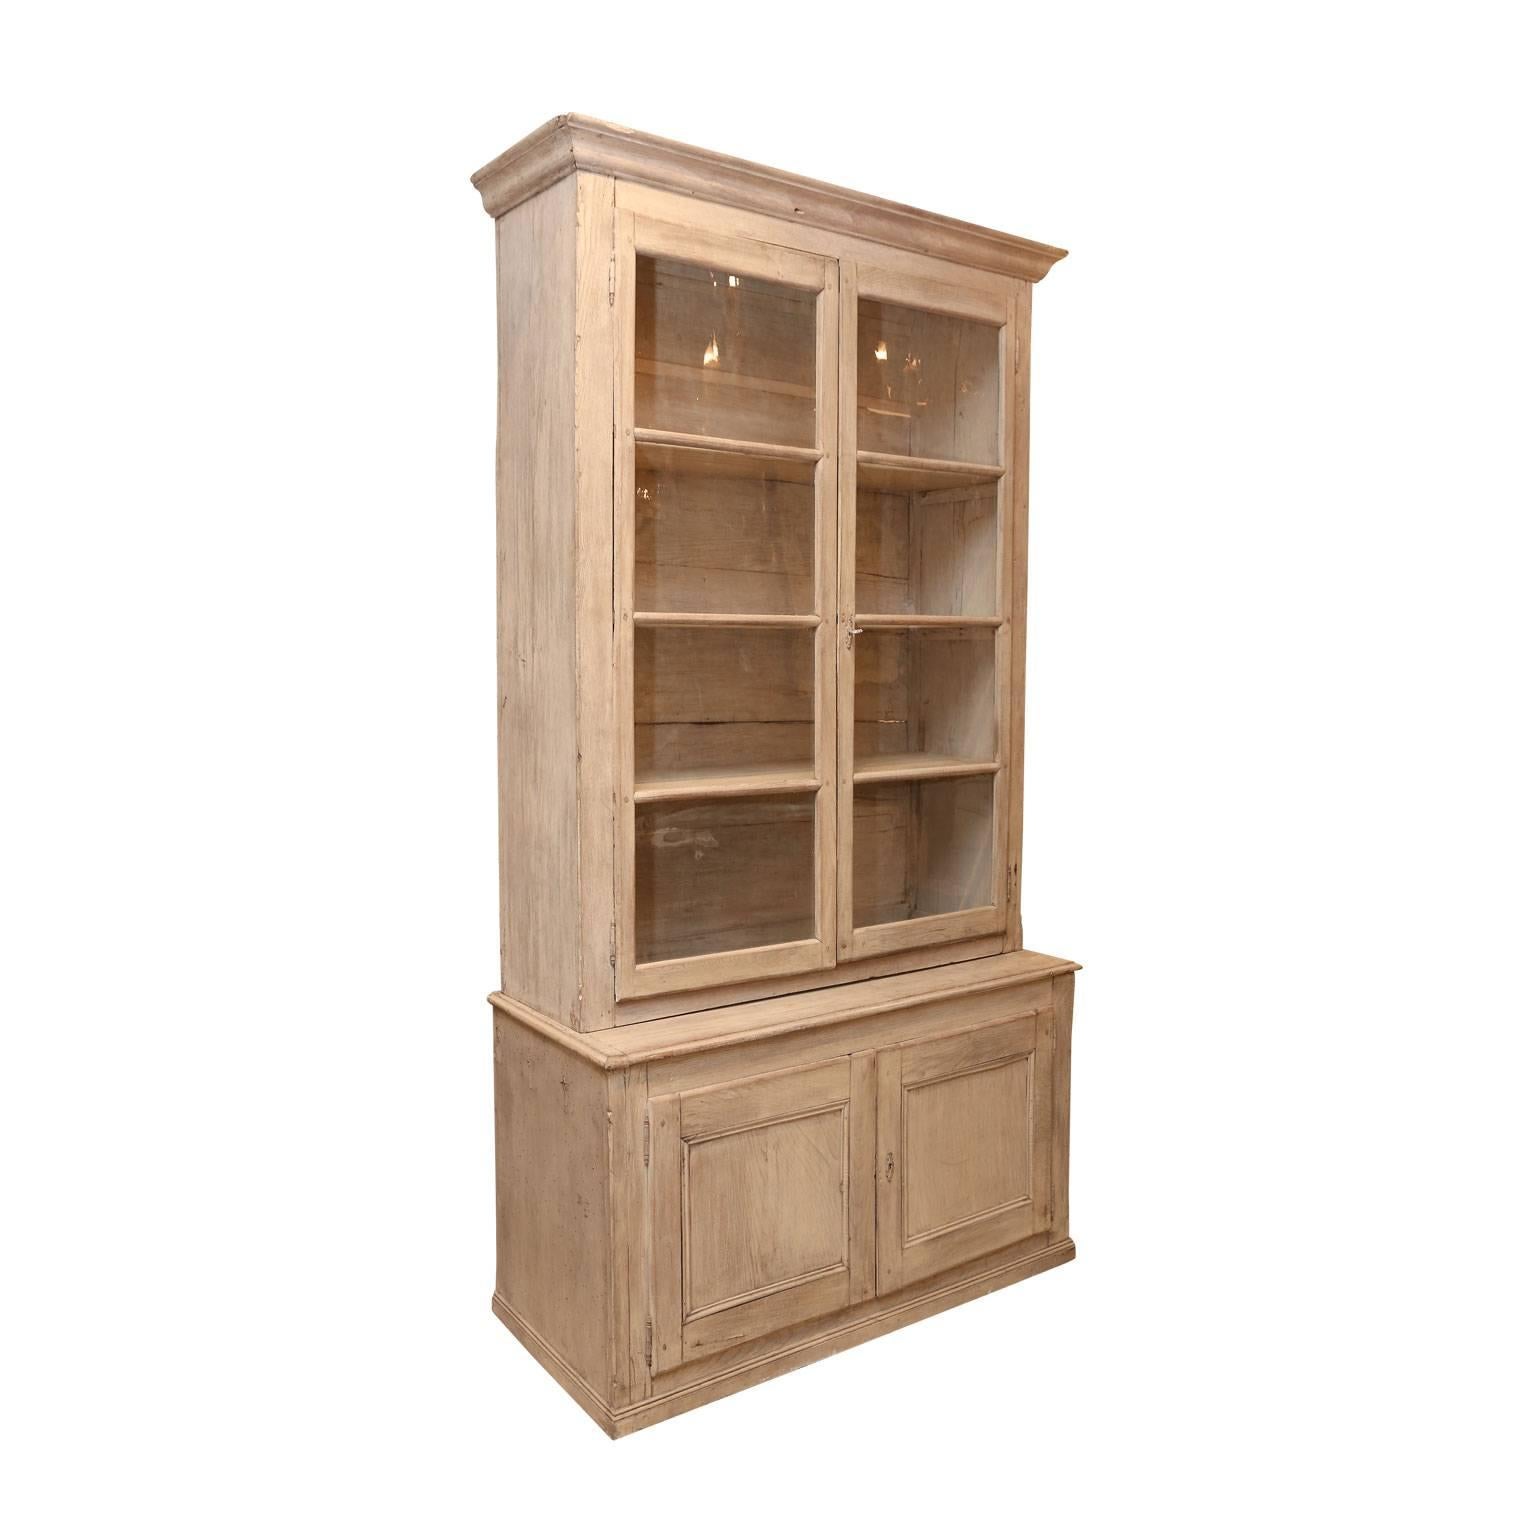 Pair of French bibliotheques: massive late 19th century bookcase altered to create a matching pair of bibliotheques. Bibliotheques each feature two glass panelled upper doors and two-door lower cabinet storage with shelf. All doors are mortise and